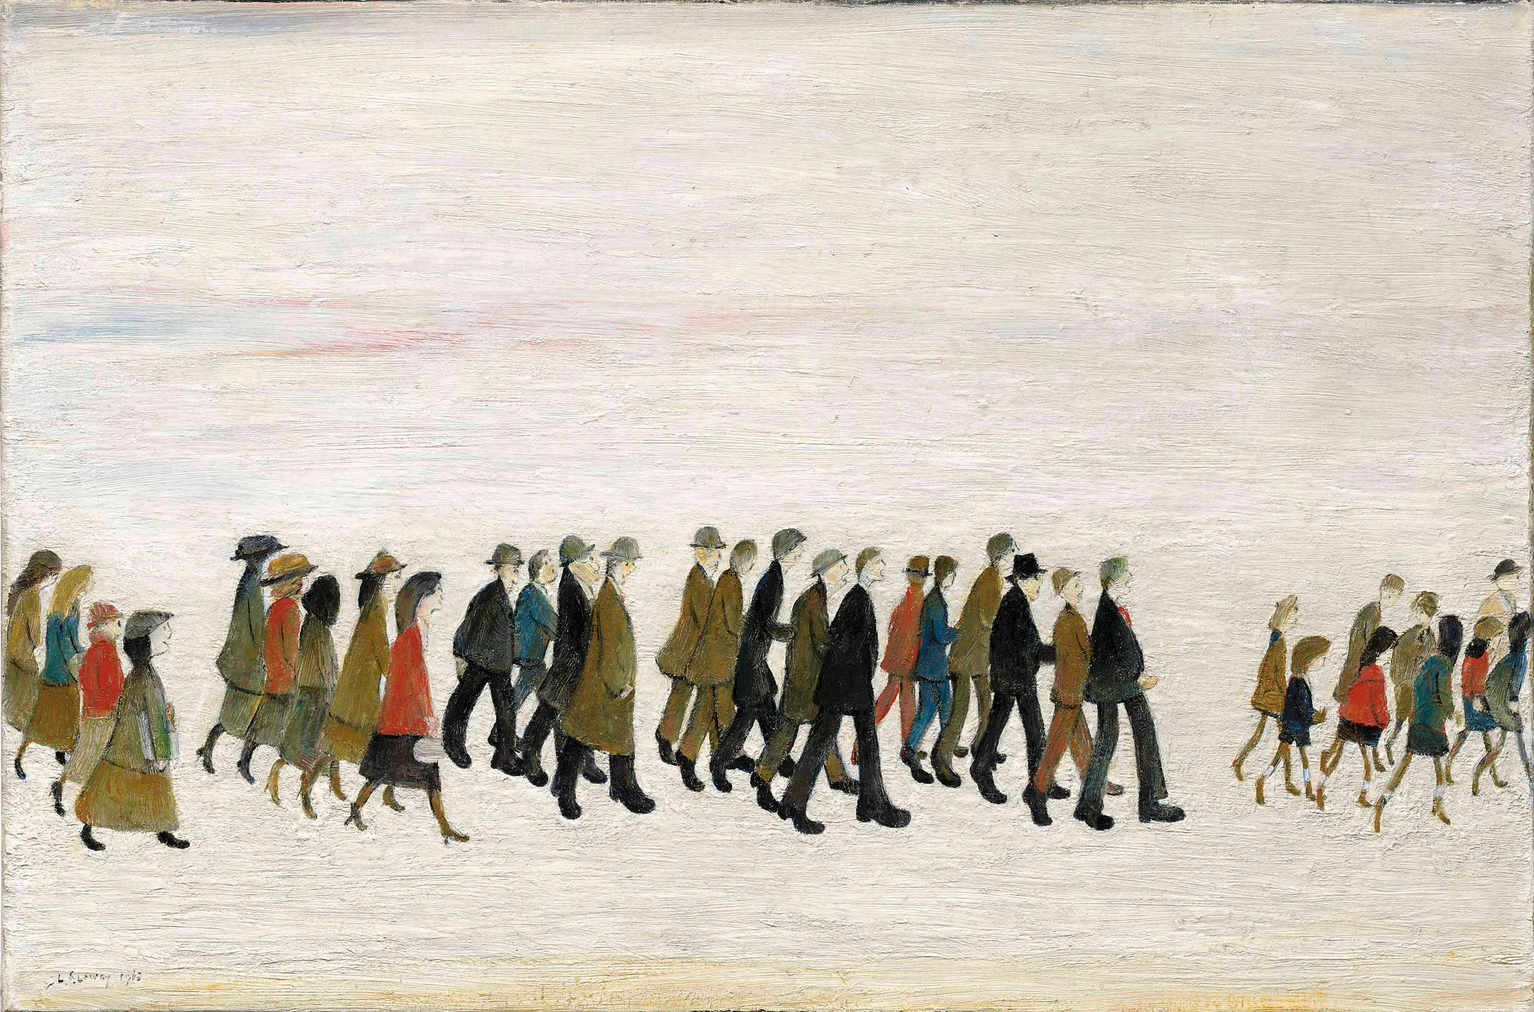 Procession in South Wales, Whit Monday (1963) by Laurence Stephen Lowry (1887 - 1976), English artist.